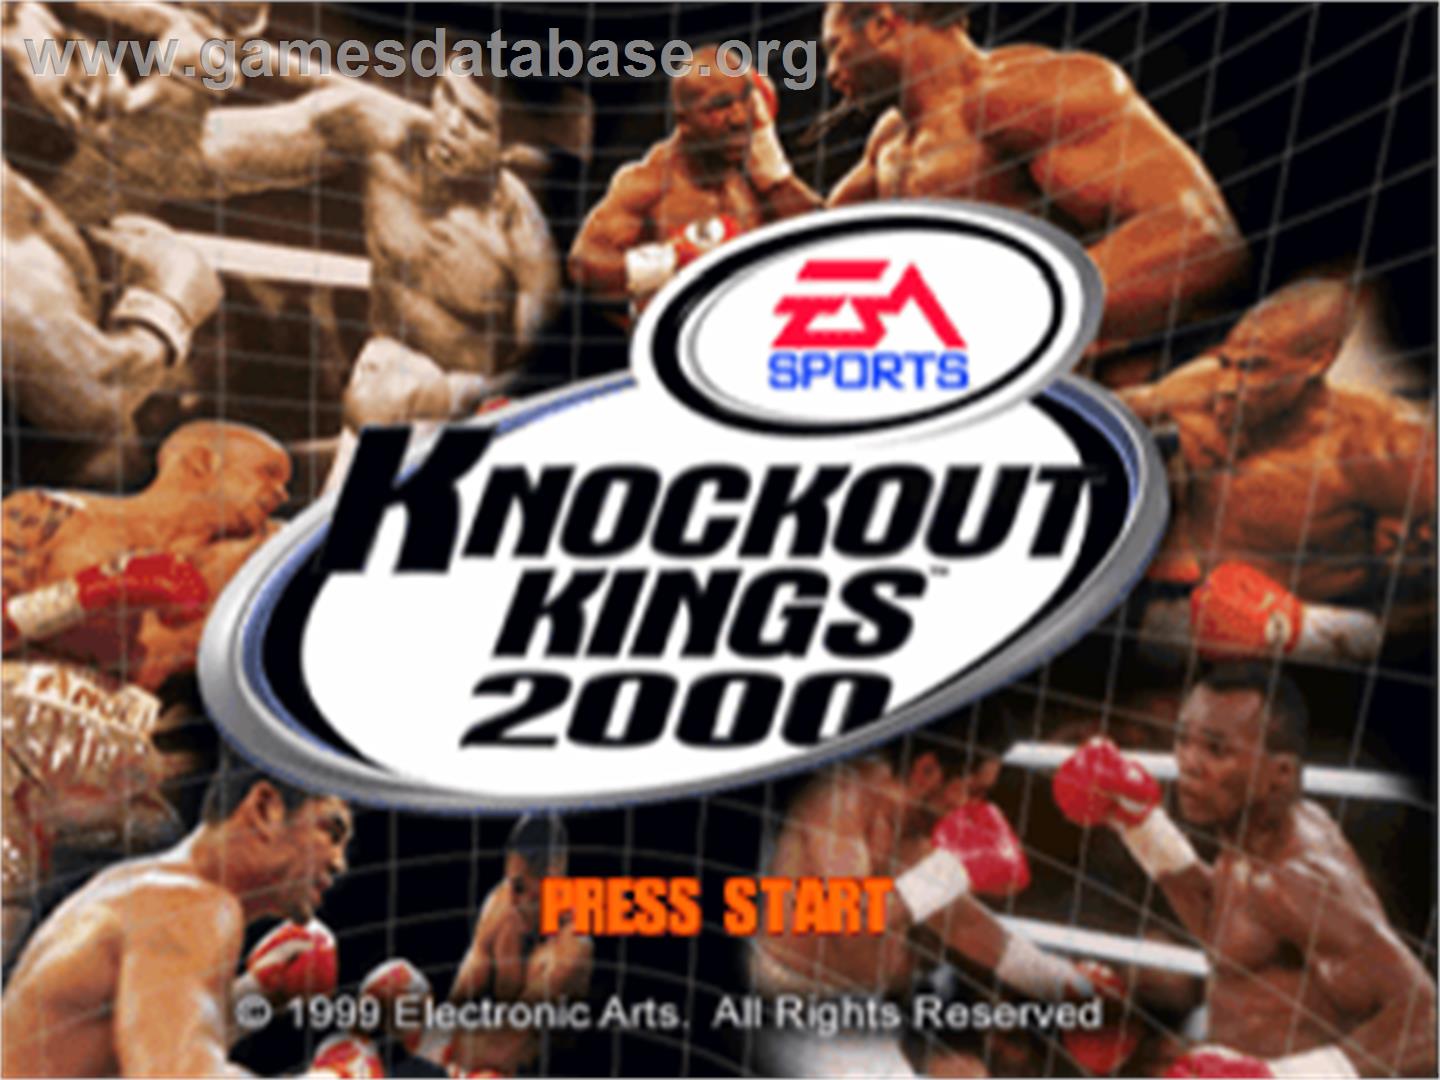 Knockout Kings 2000 - Sony Playstation - Artwork - Title Screen